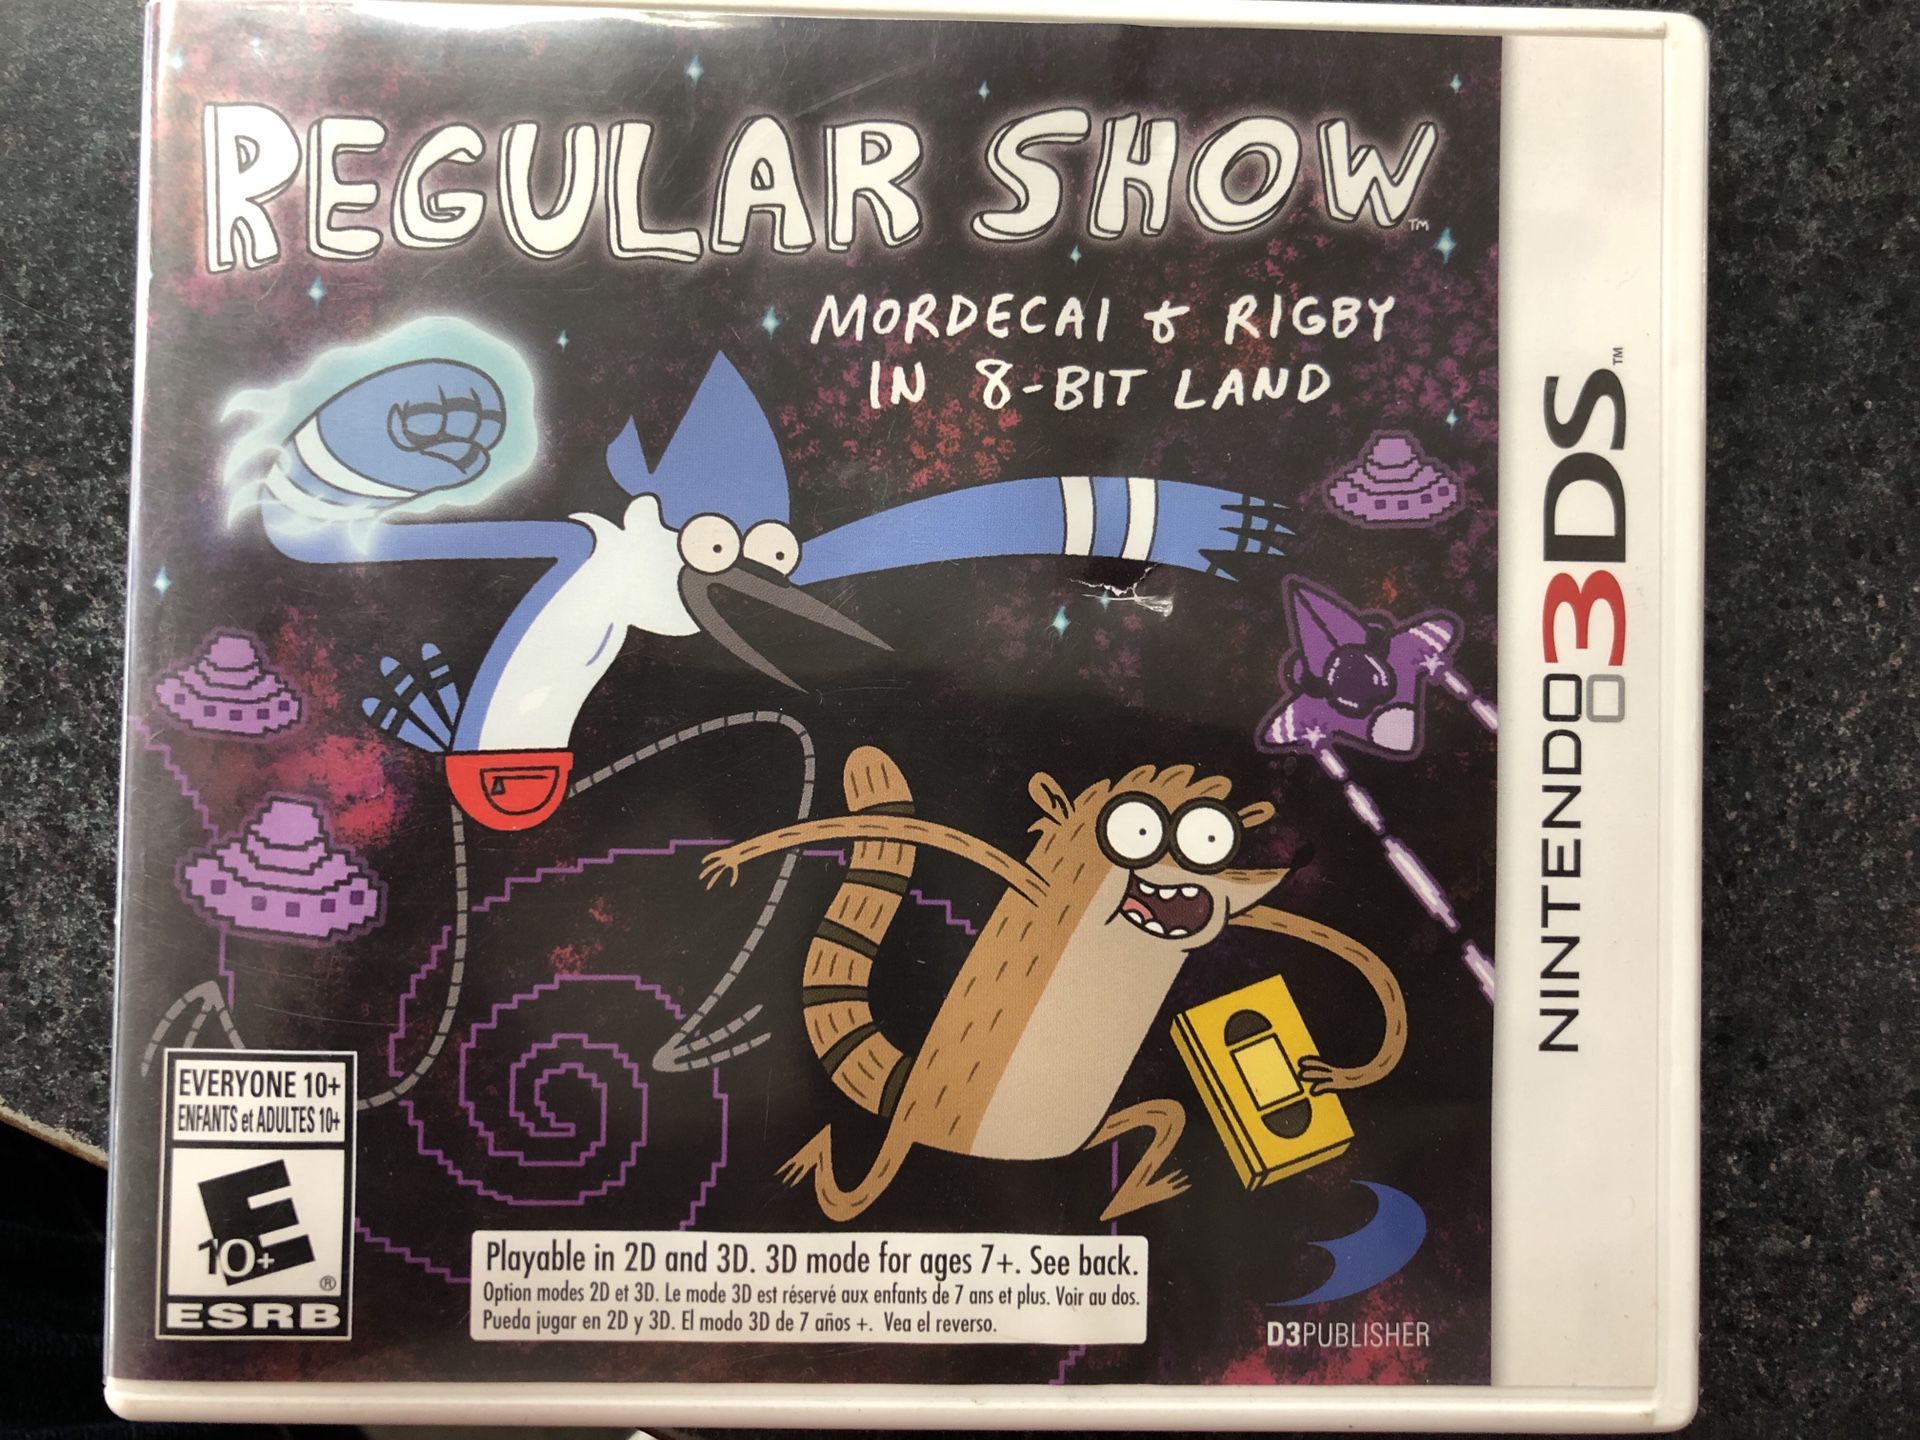 Regular Show Mordecai & Rigby in 8-bit land Nintendo 3DS game - Used